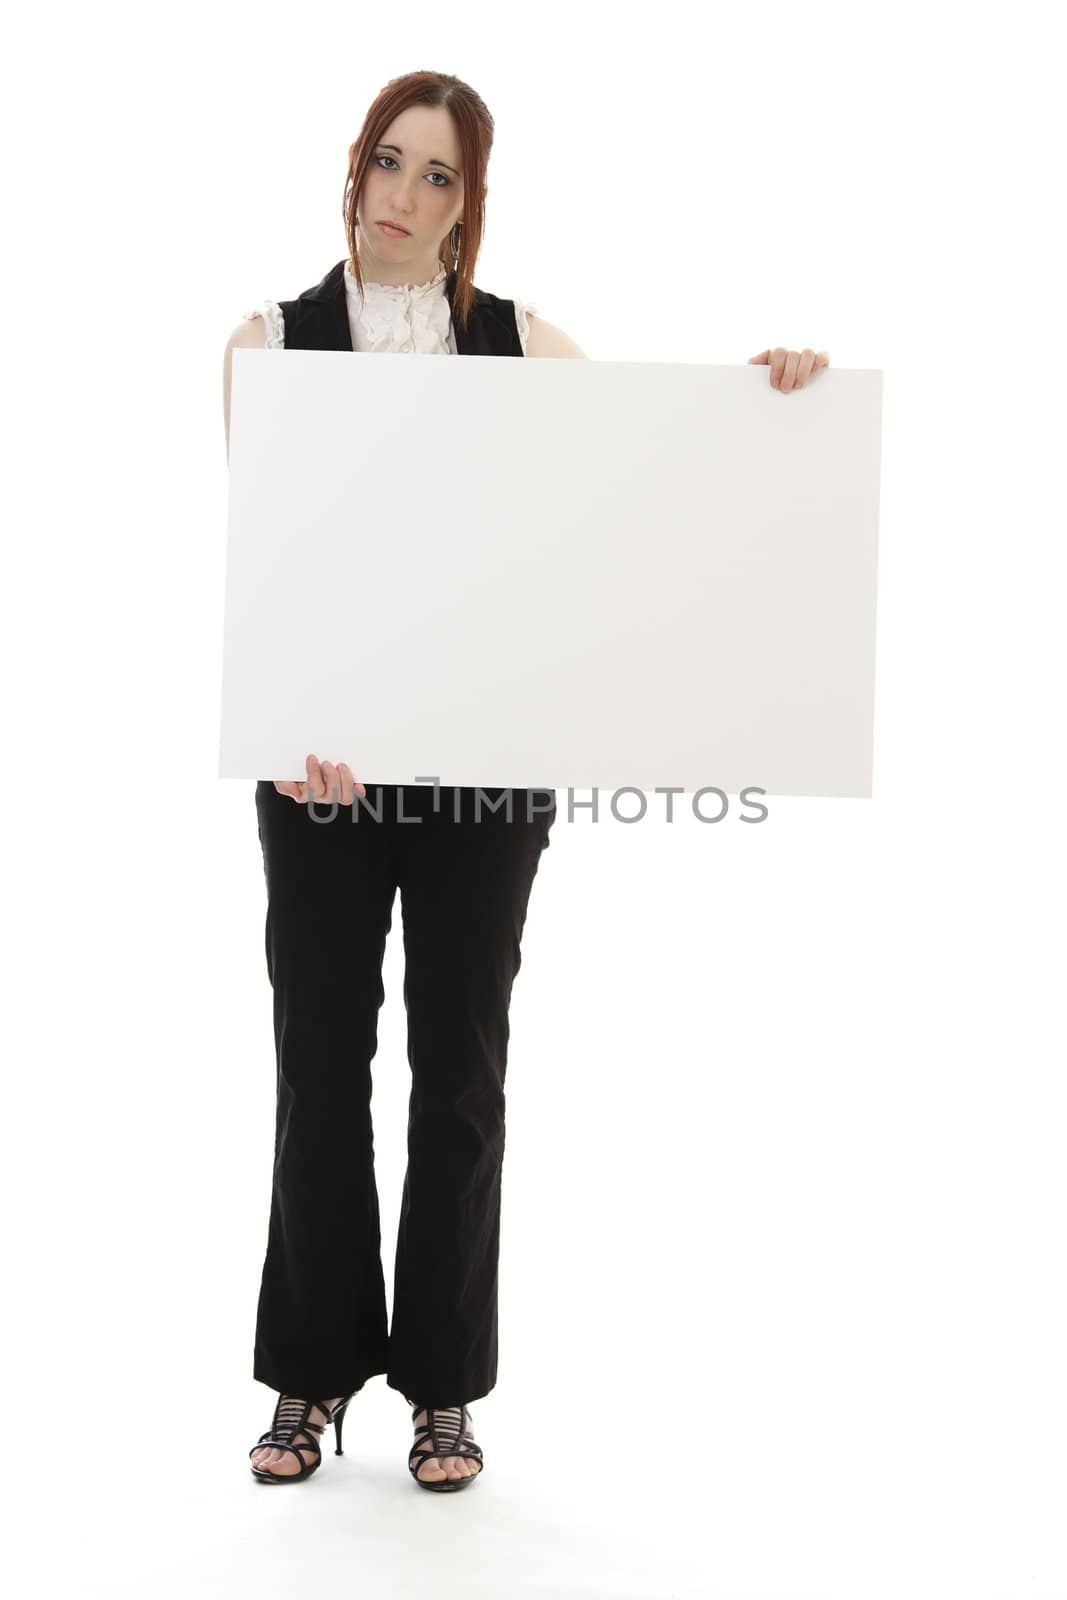 Young woman in business suit holding a white sign with a sad expression against a white background